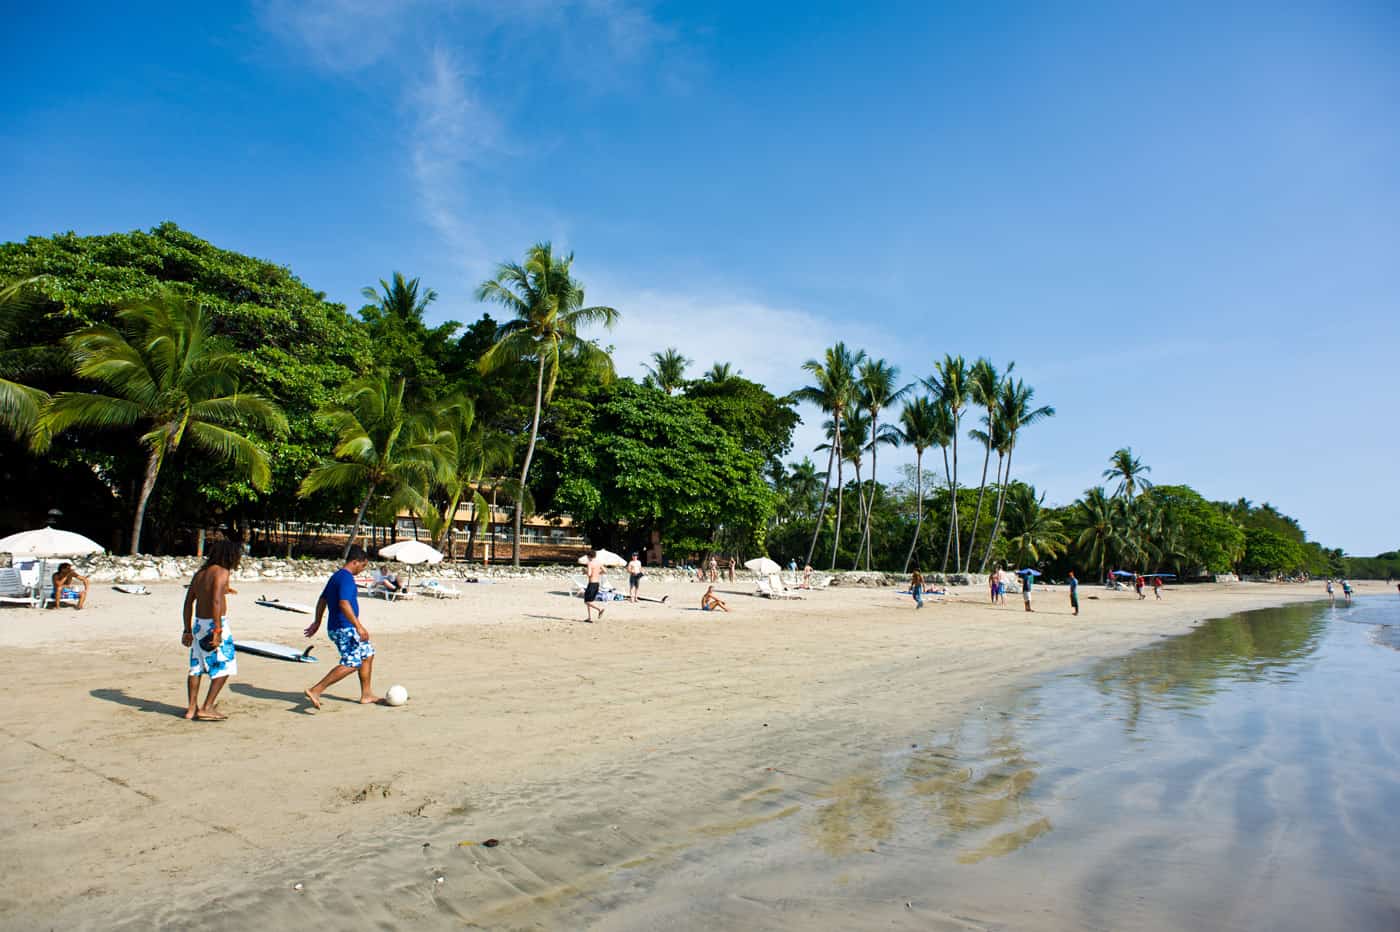 A group of people walking on a beach in Costa Rica with palm trees.